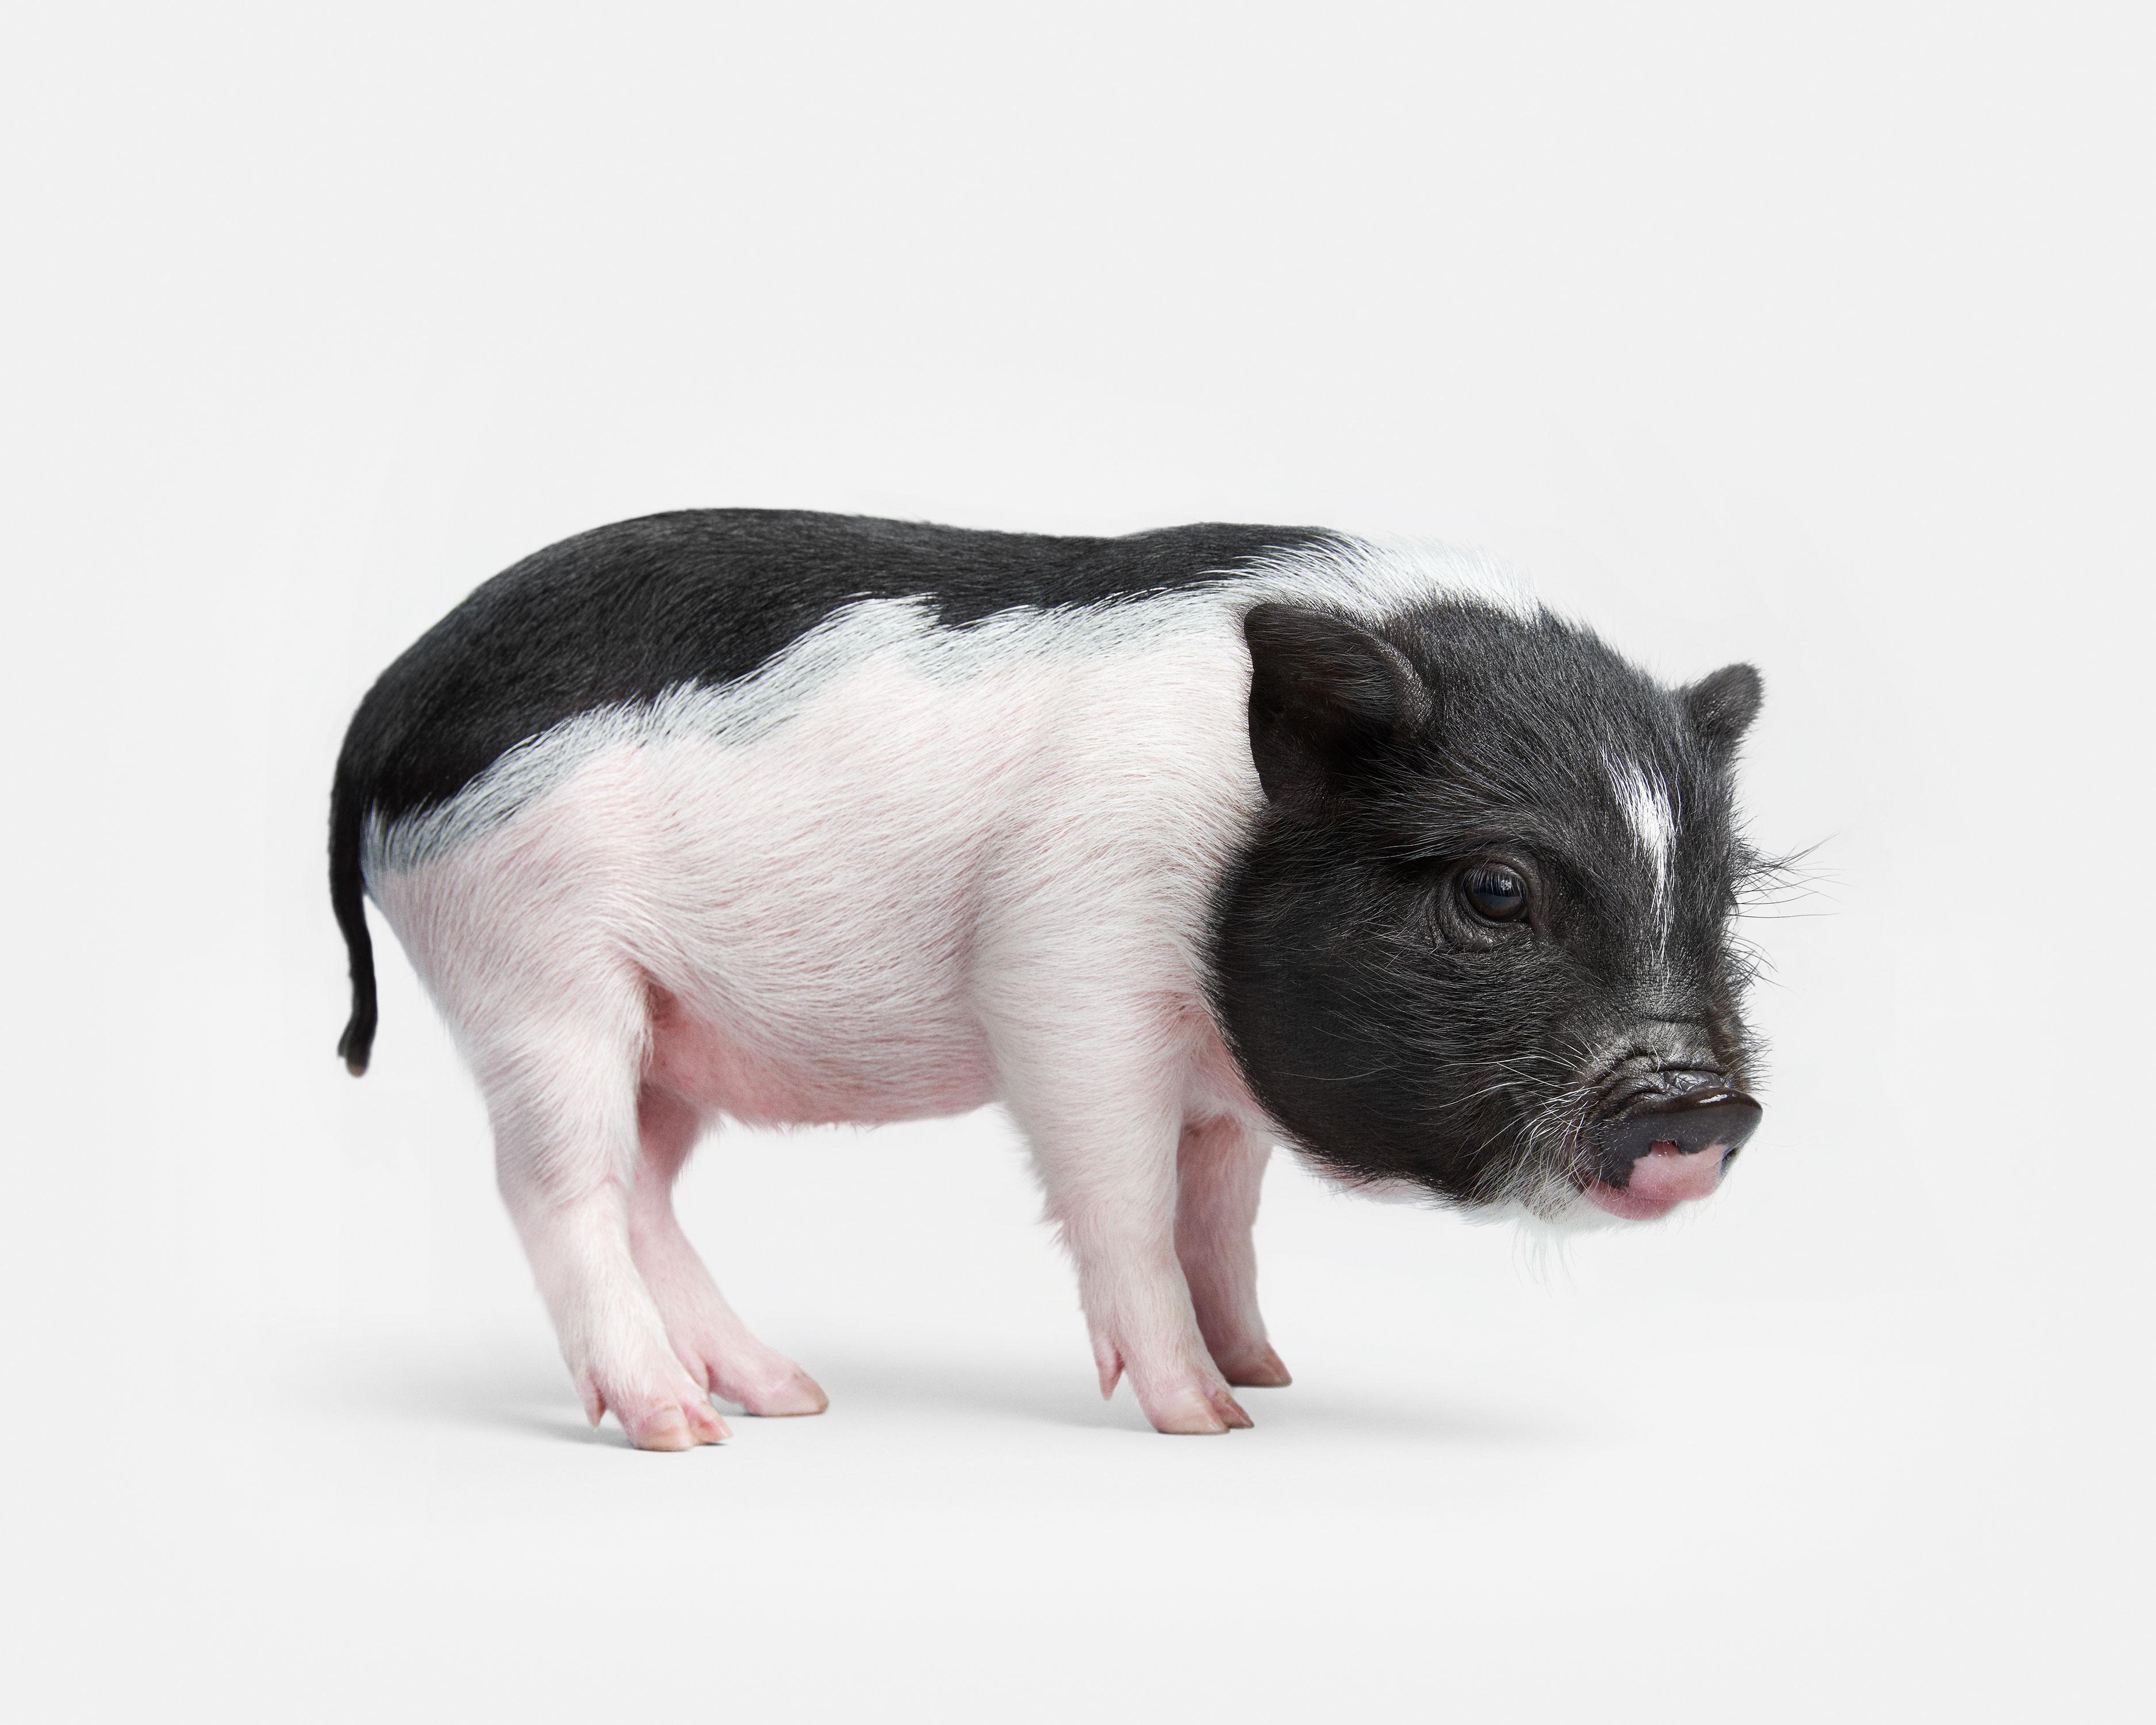 Randal Ford - Pot Bellied Piglet, Photography 2018, Printed After